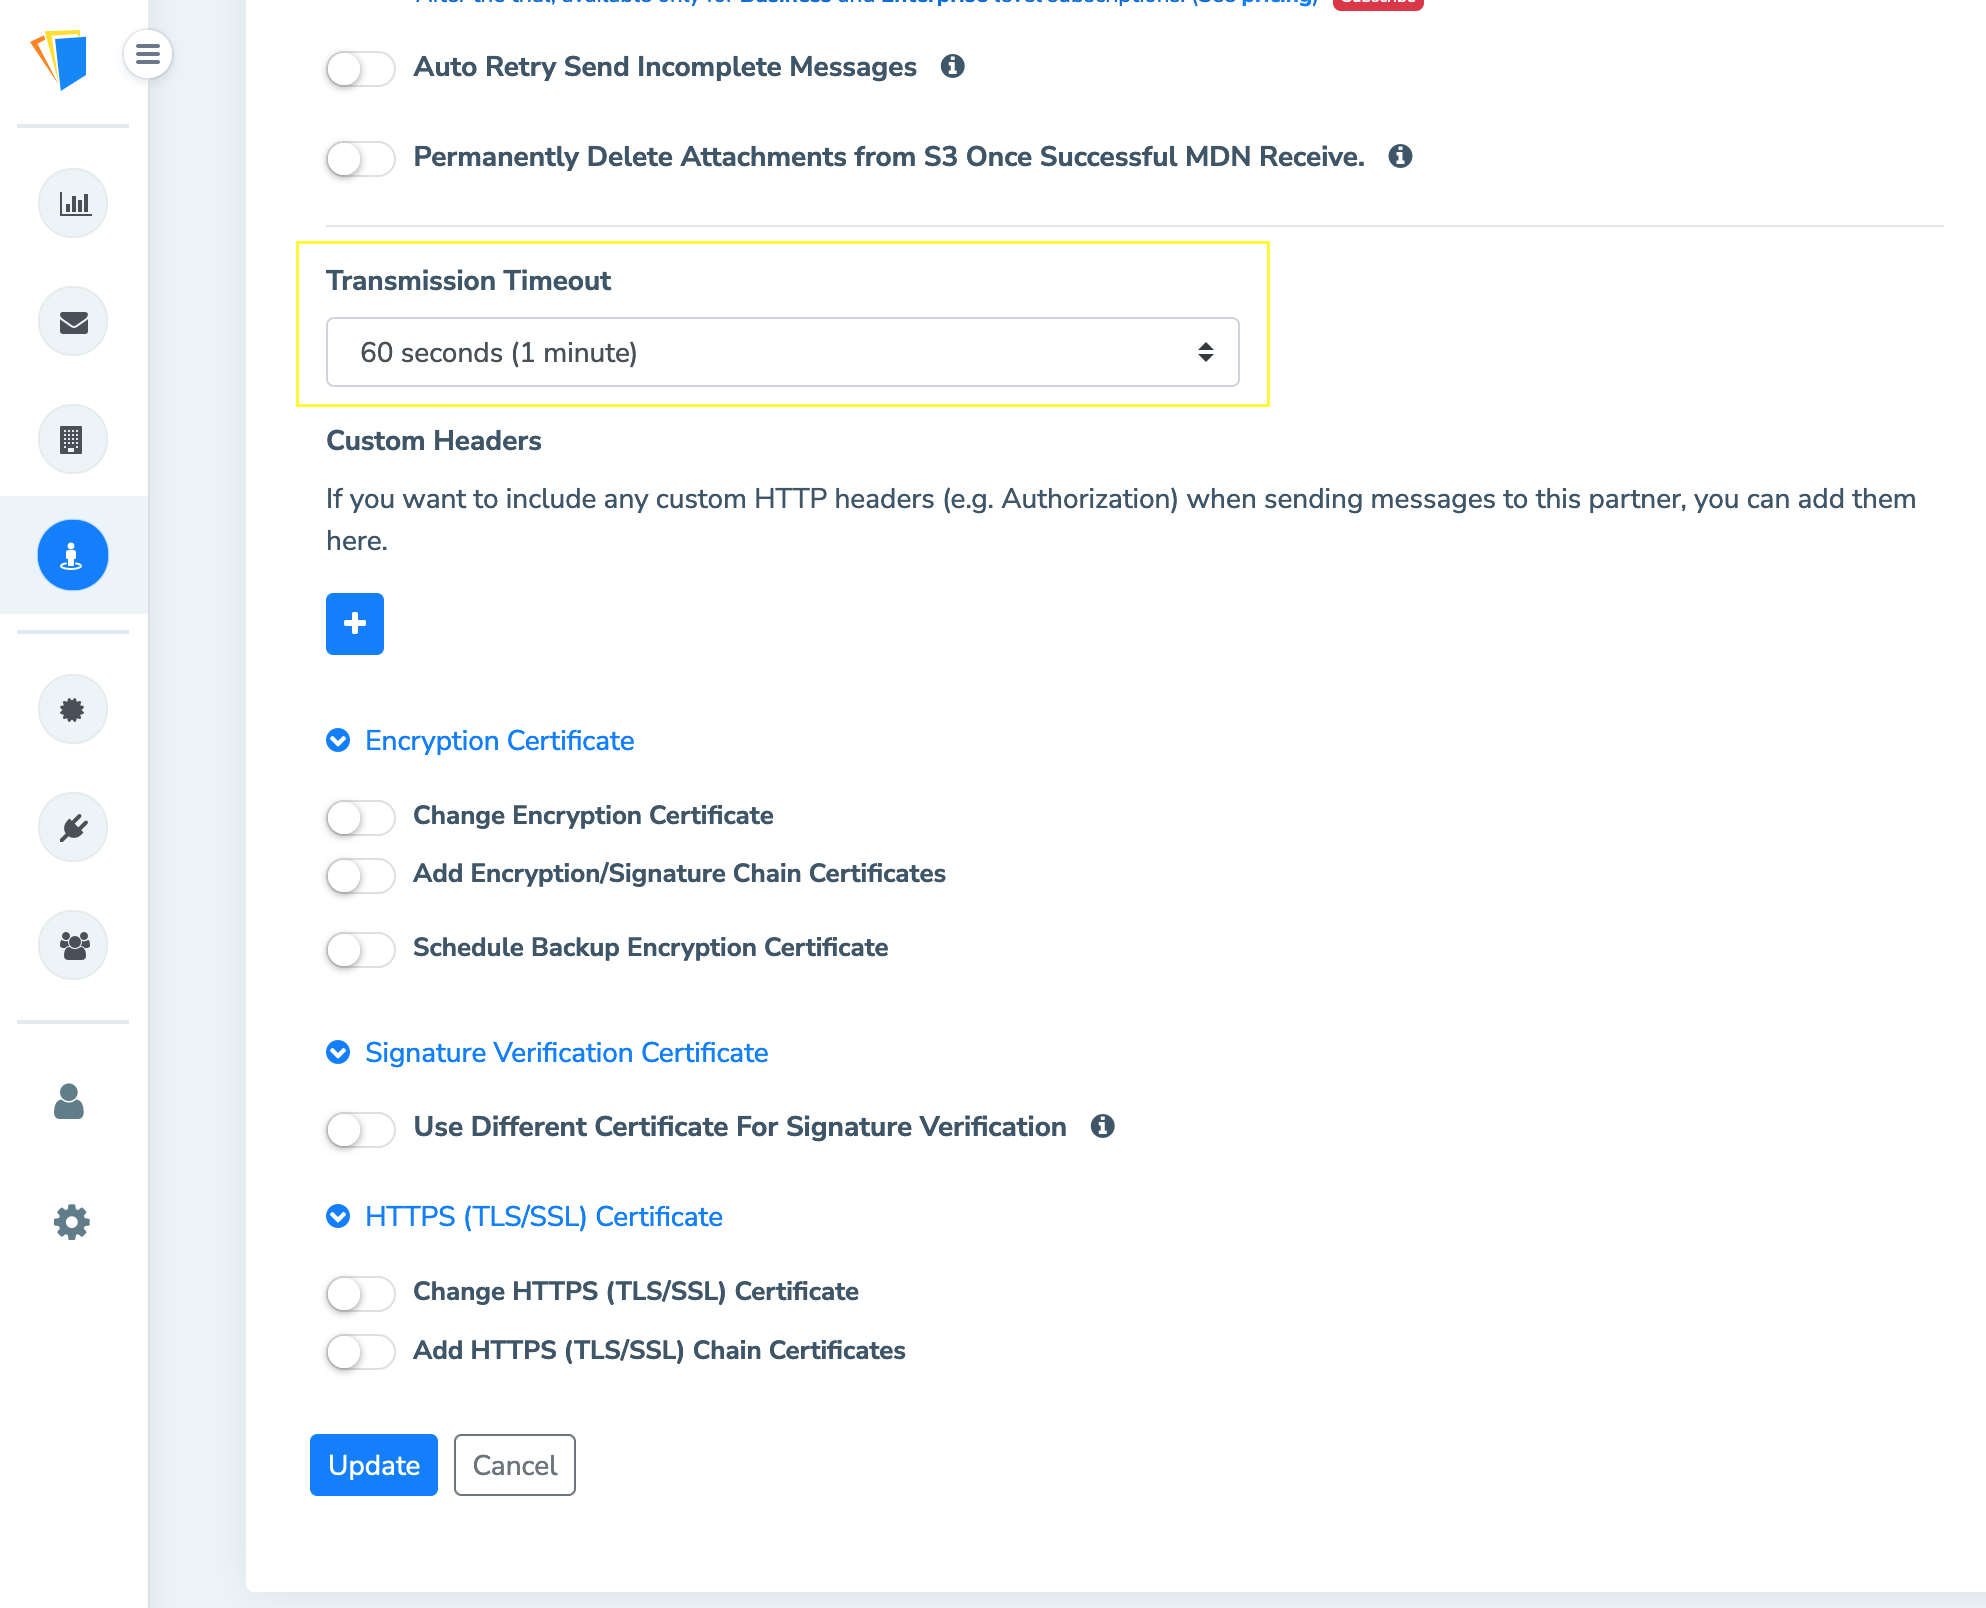 Manage Partner view with Transmission Timeout field